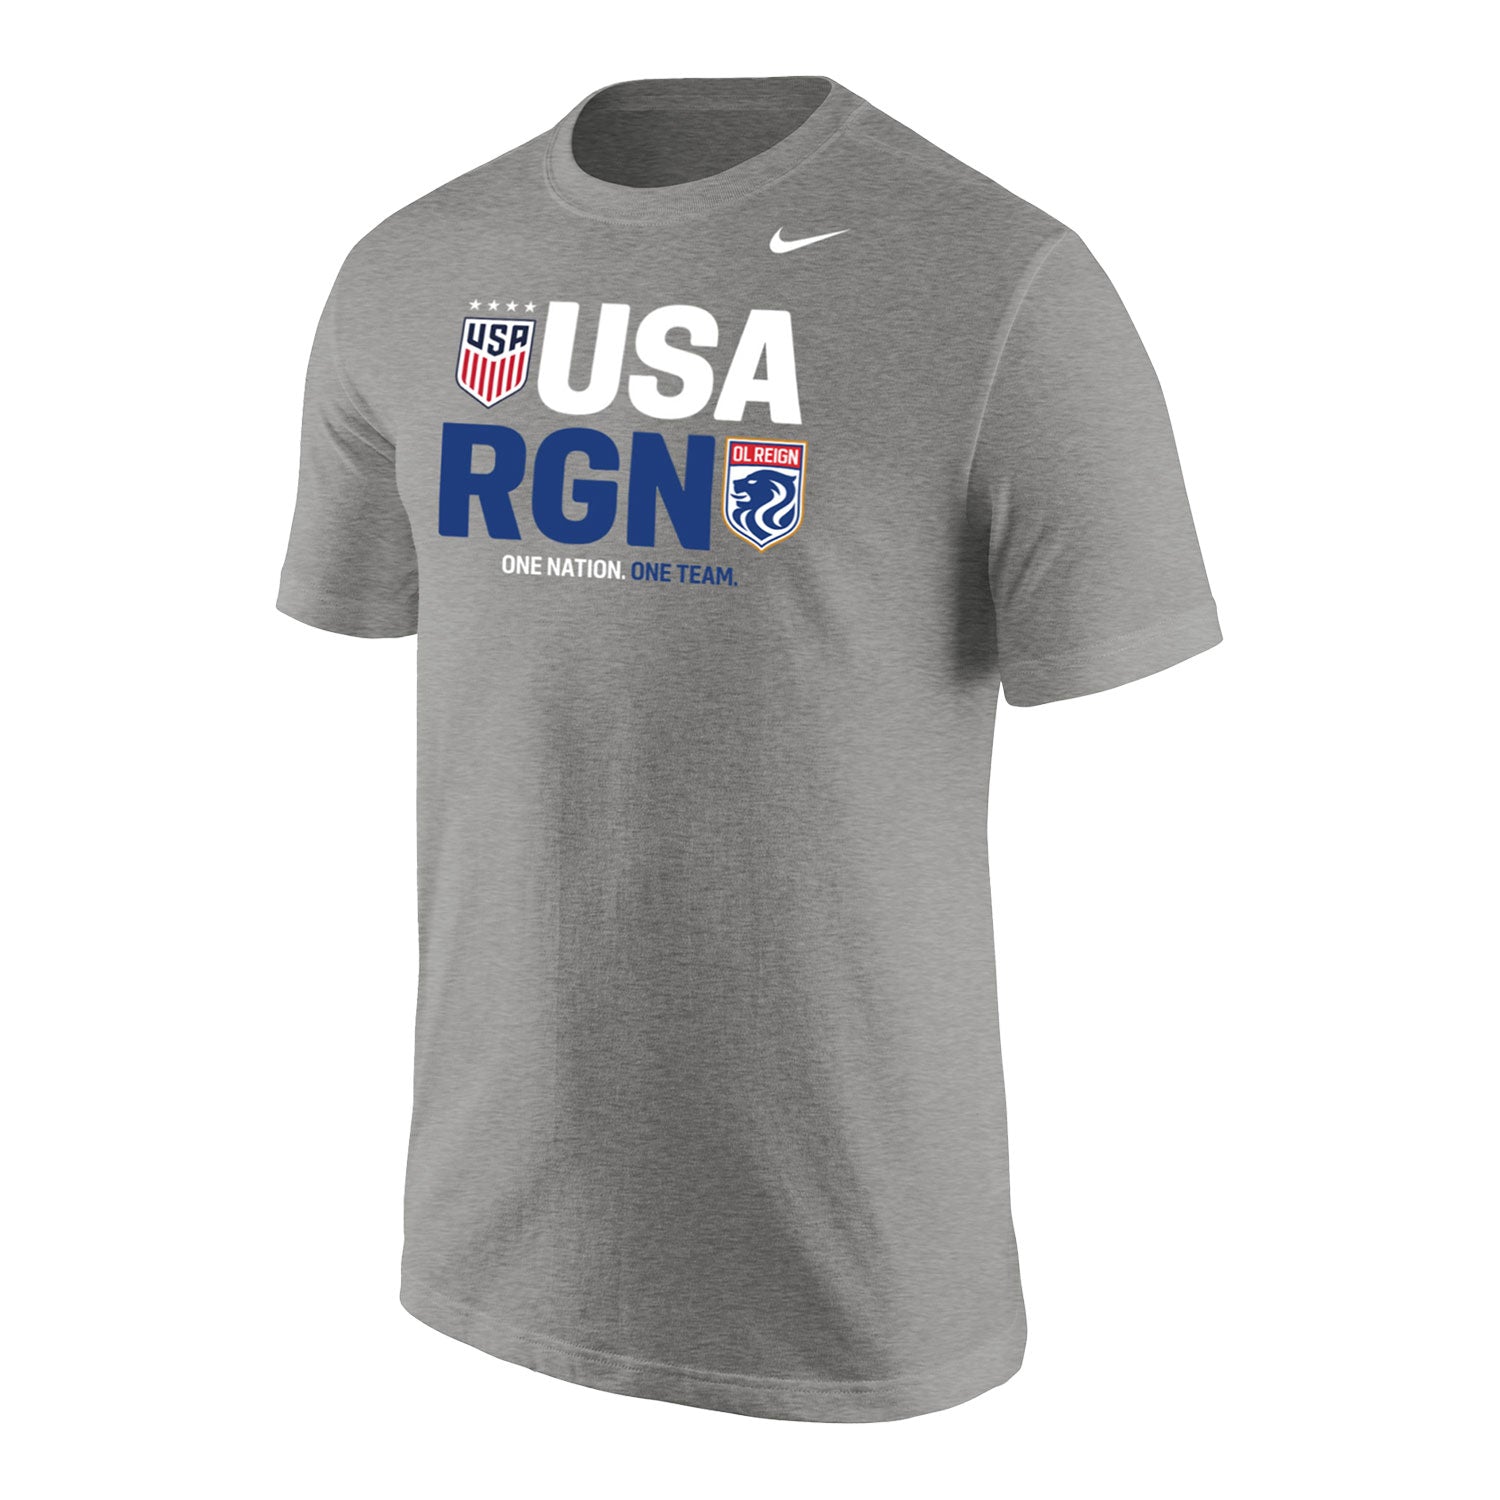 Unisex Nike OL Reign x USWNT Grey Tee - Official U.S. Soccer Store